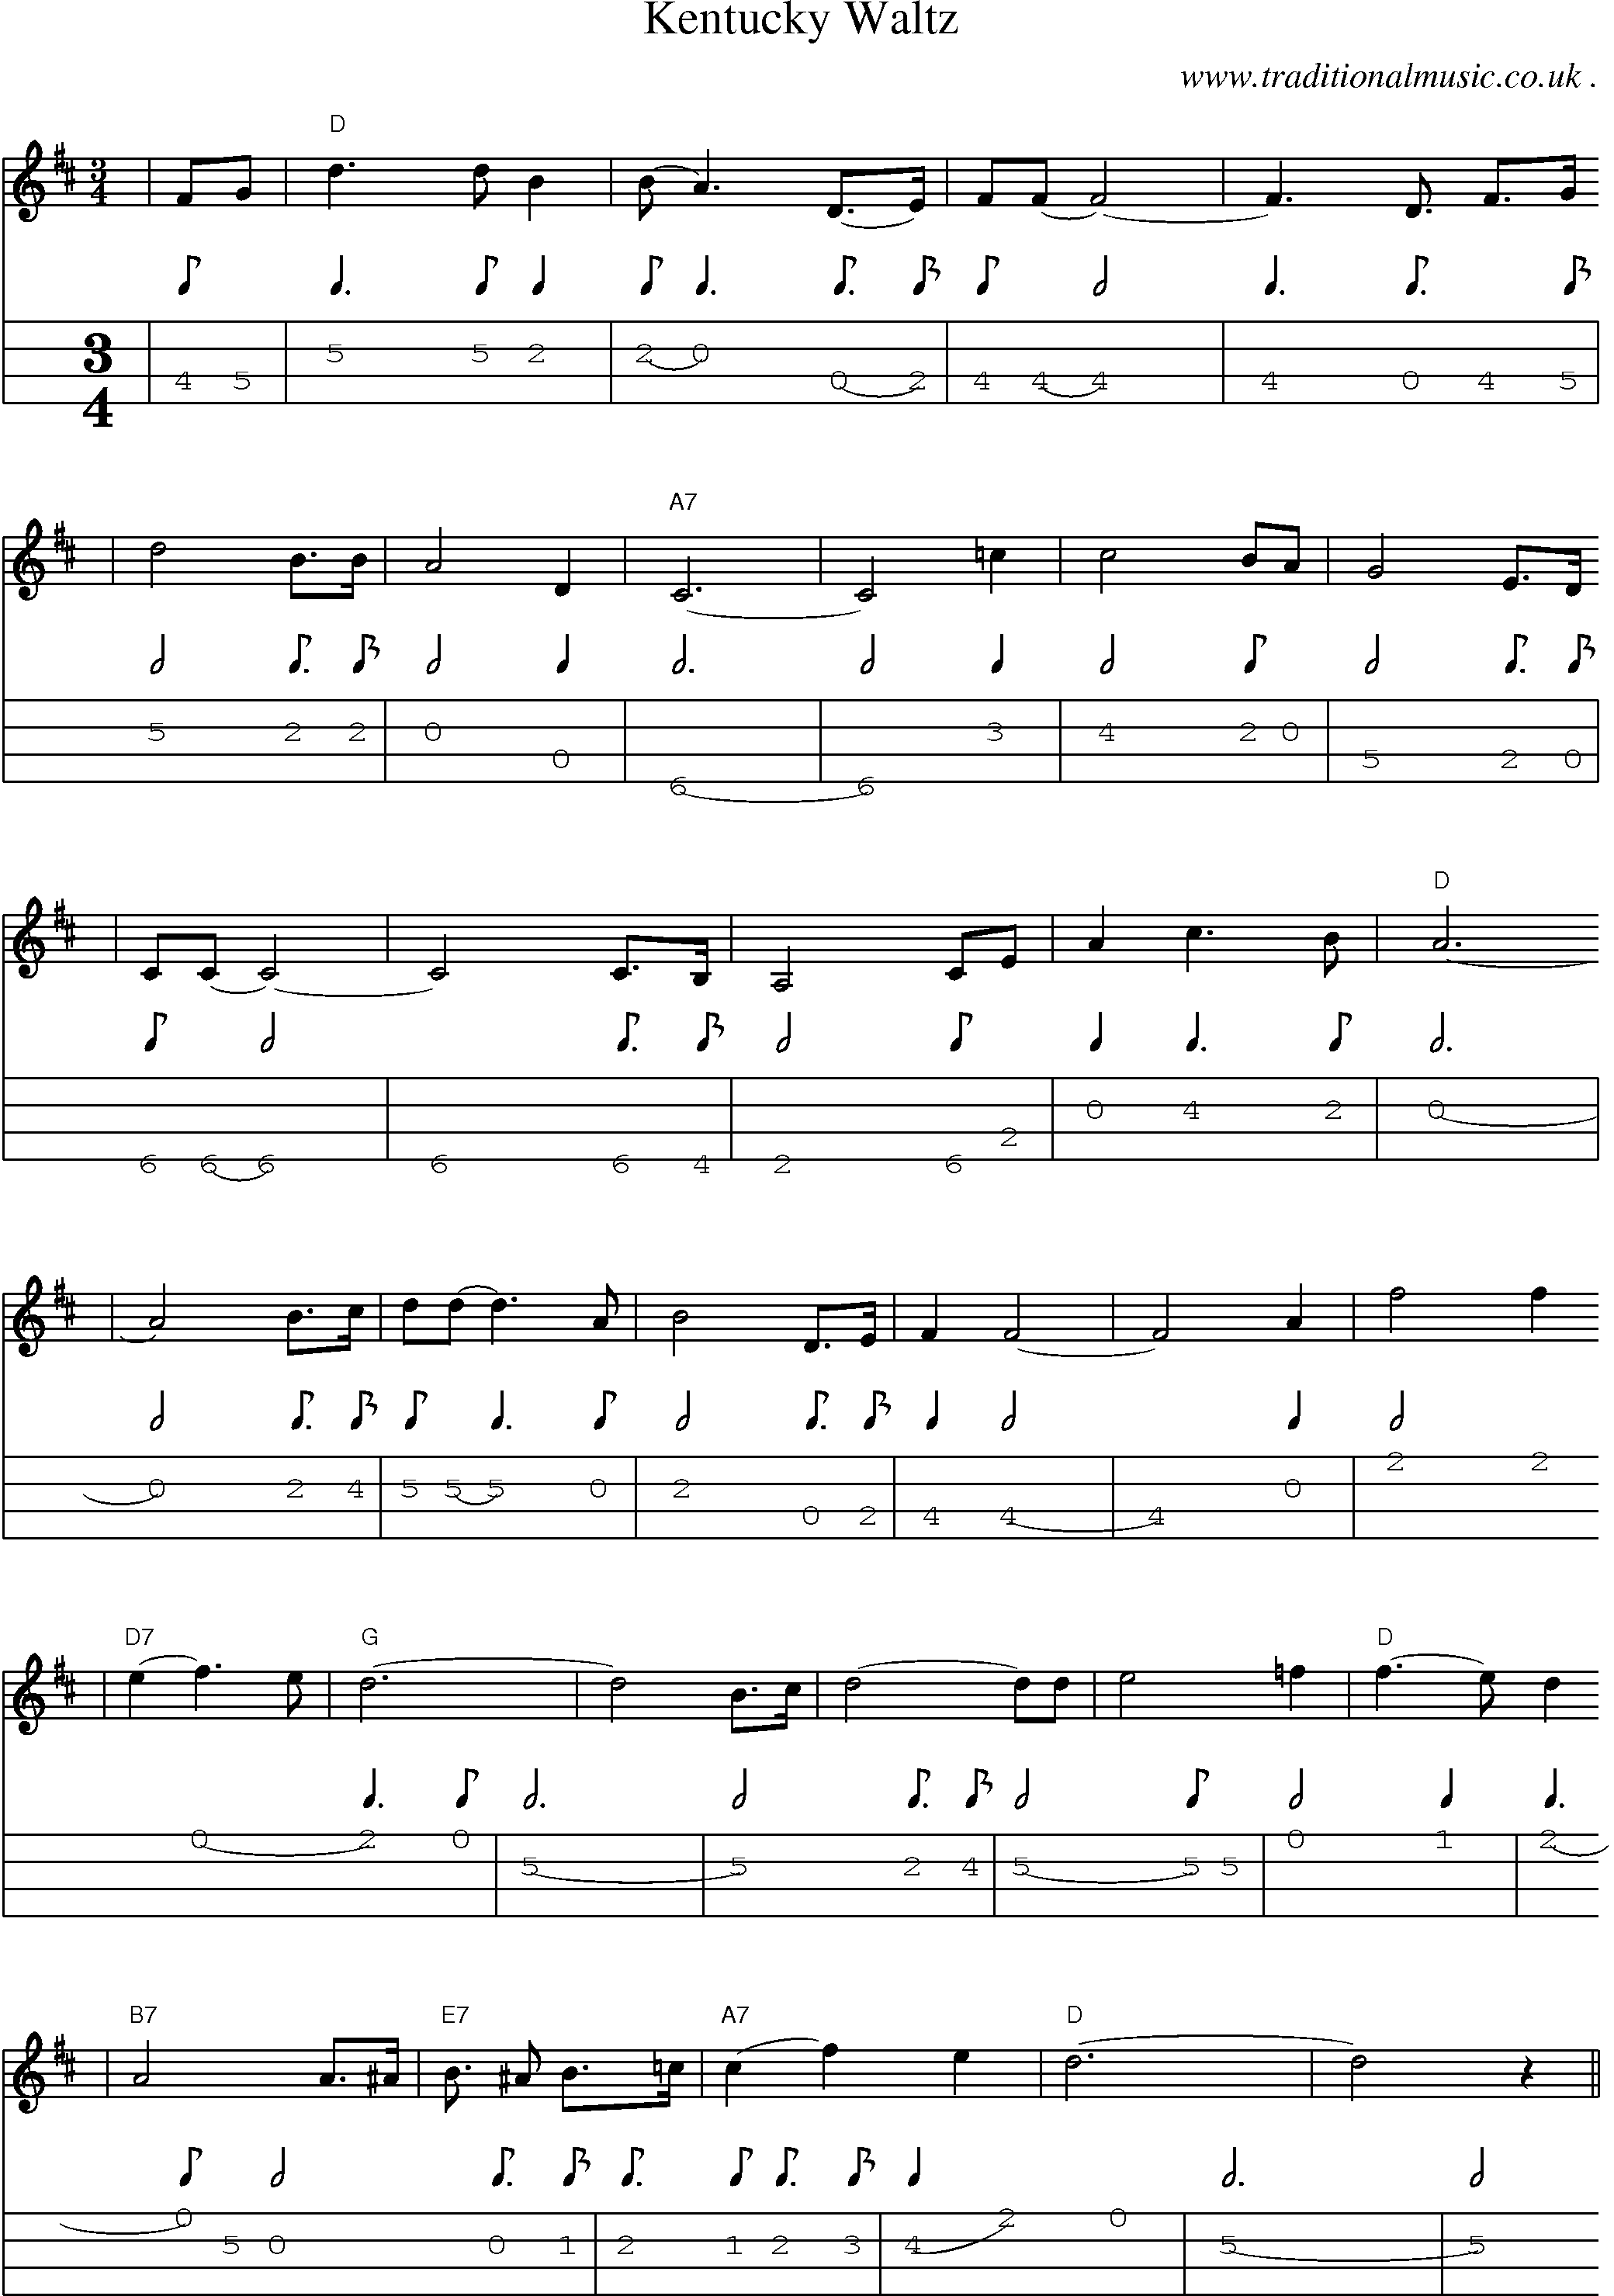 American Old Time Music Scores And Tabs For Mandolin Kentucky Waltz 